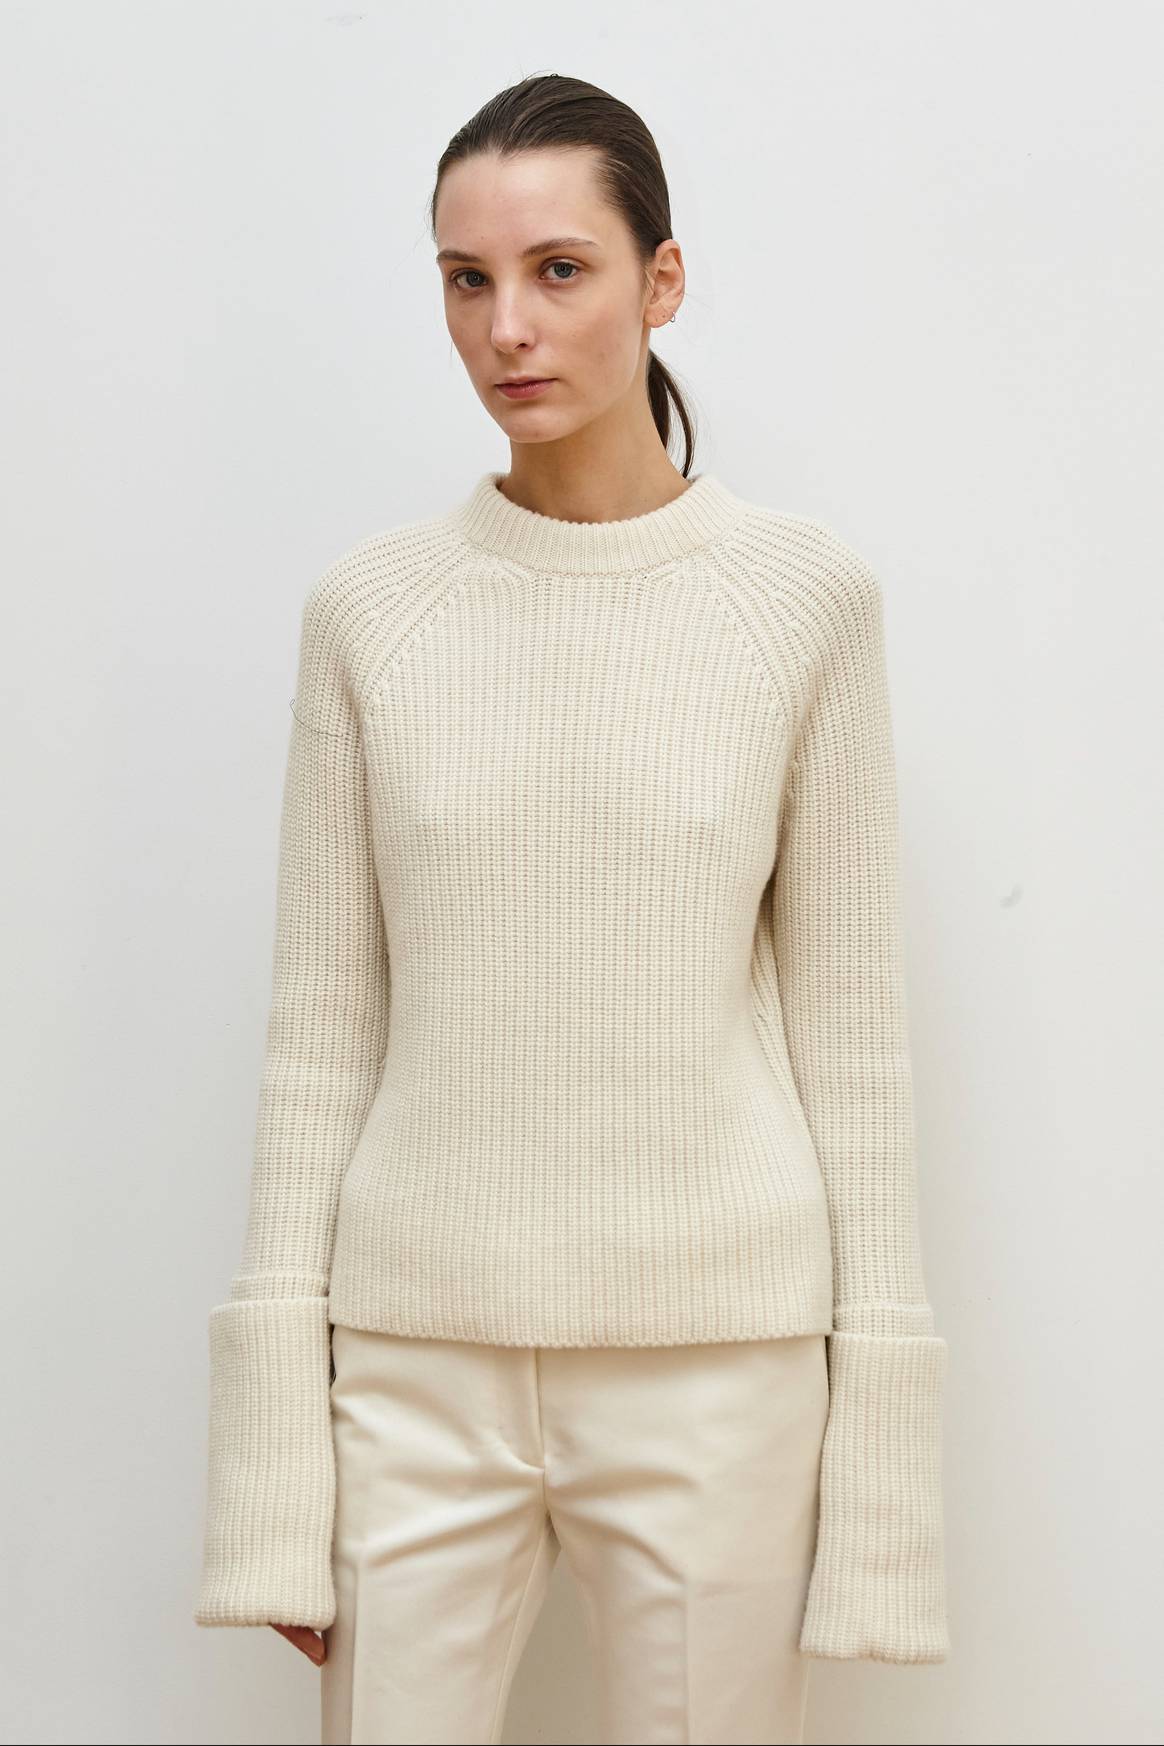 In this image, you can clearly see rows of v's at the front of the knitted fabric. Credit: image of Sa Su Phi, autumn/winter 2023 ready-to-wear collection, via Launchmetrics Spotlight.